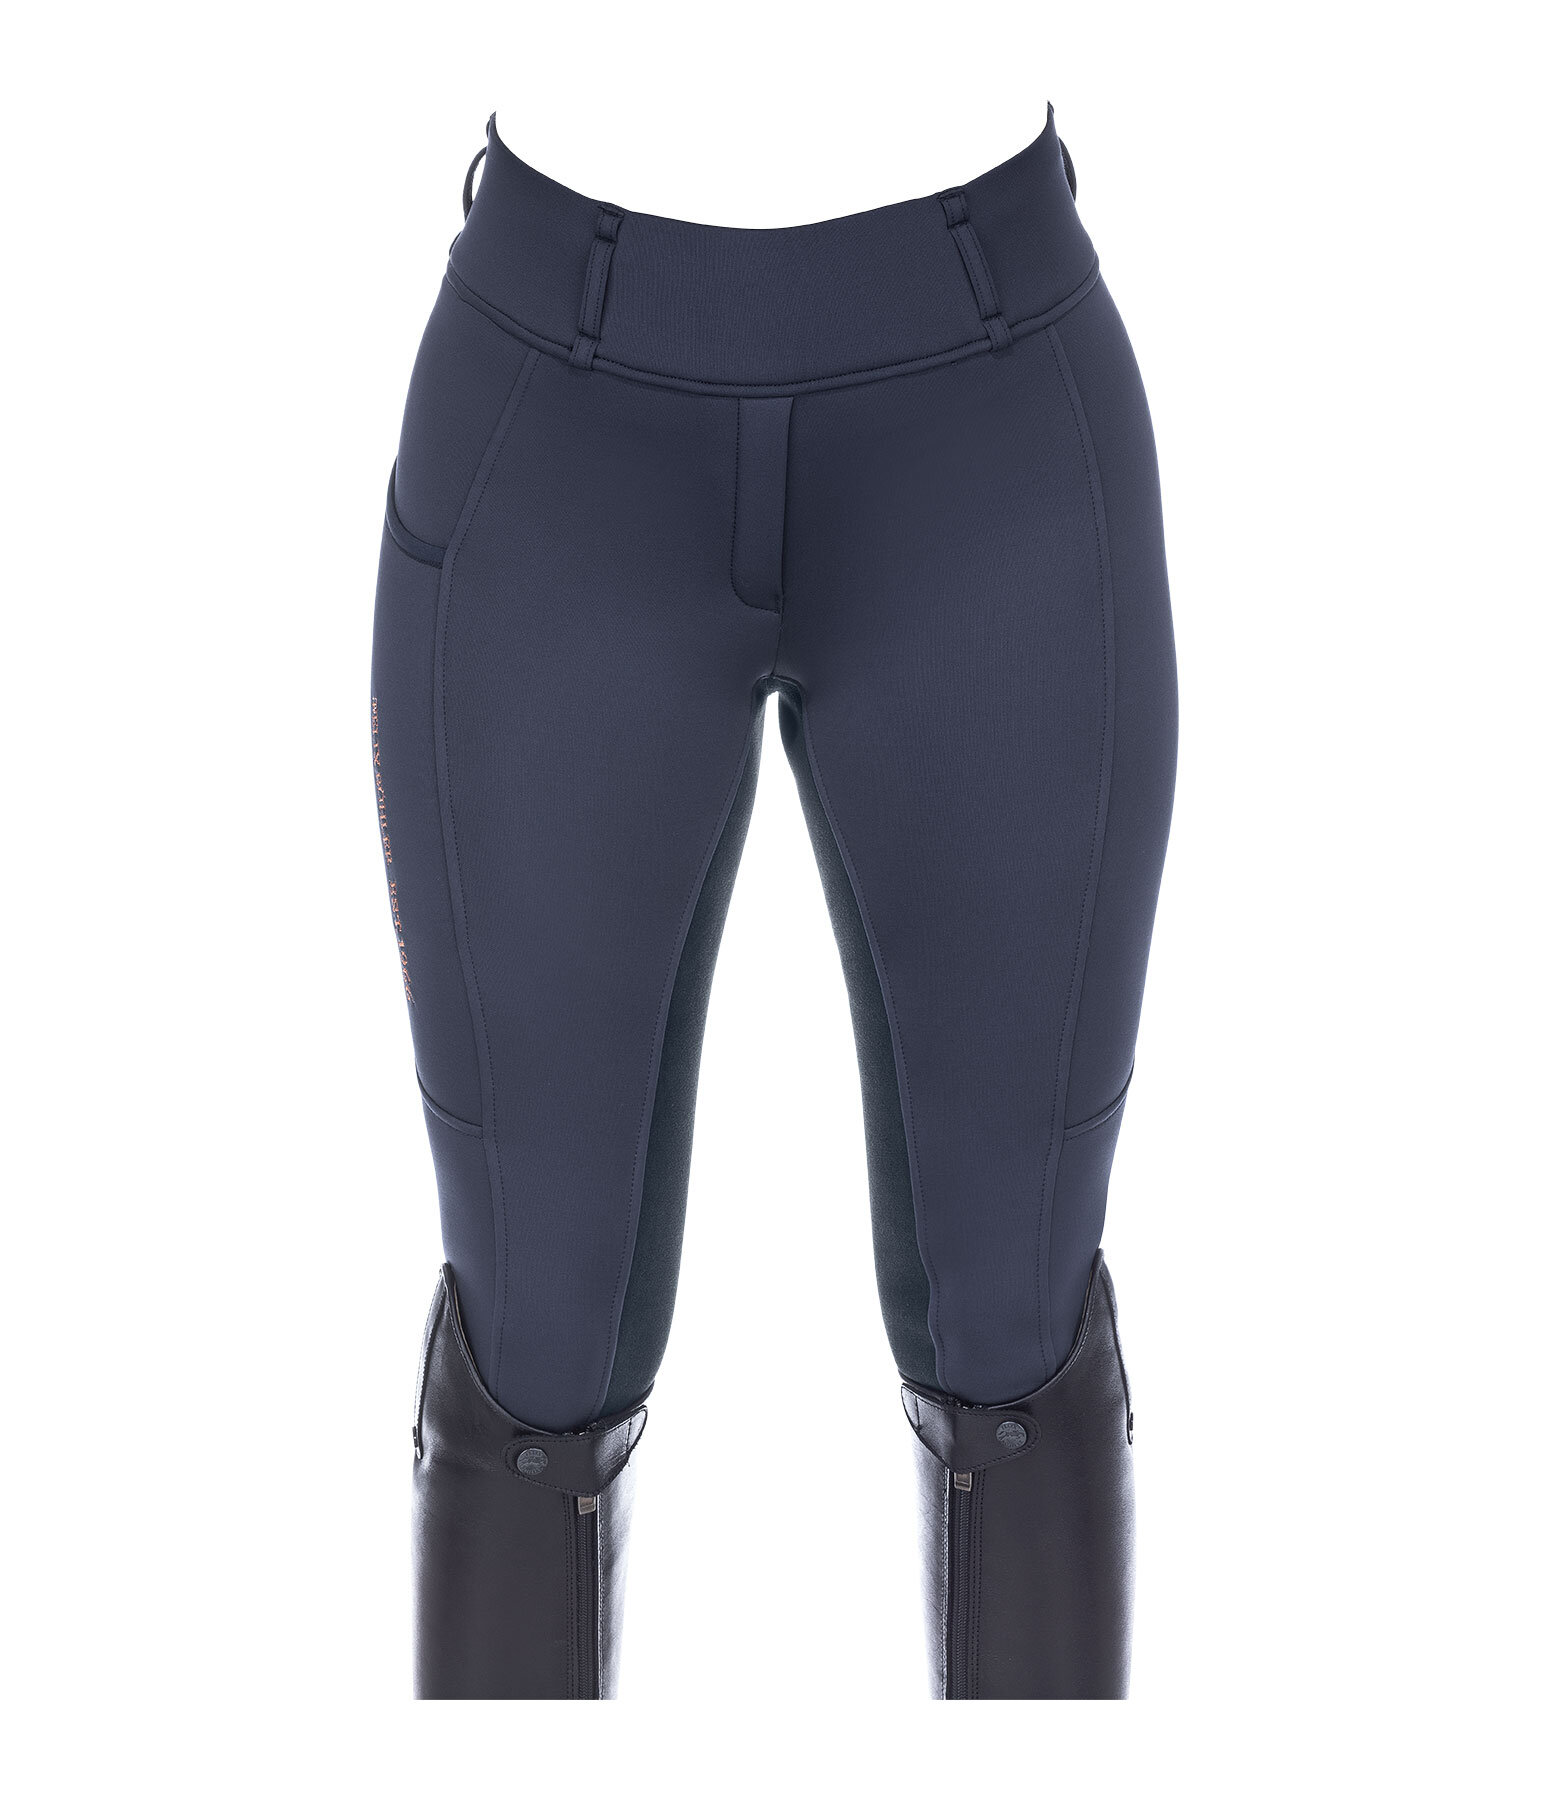 Thermal Full Seat Riding Tights Noelle Life Cycle